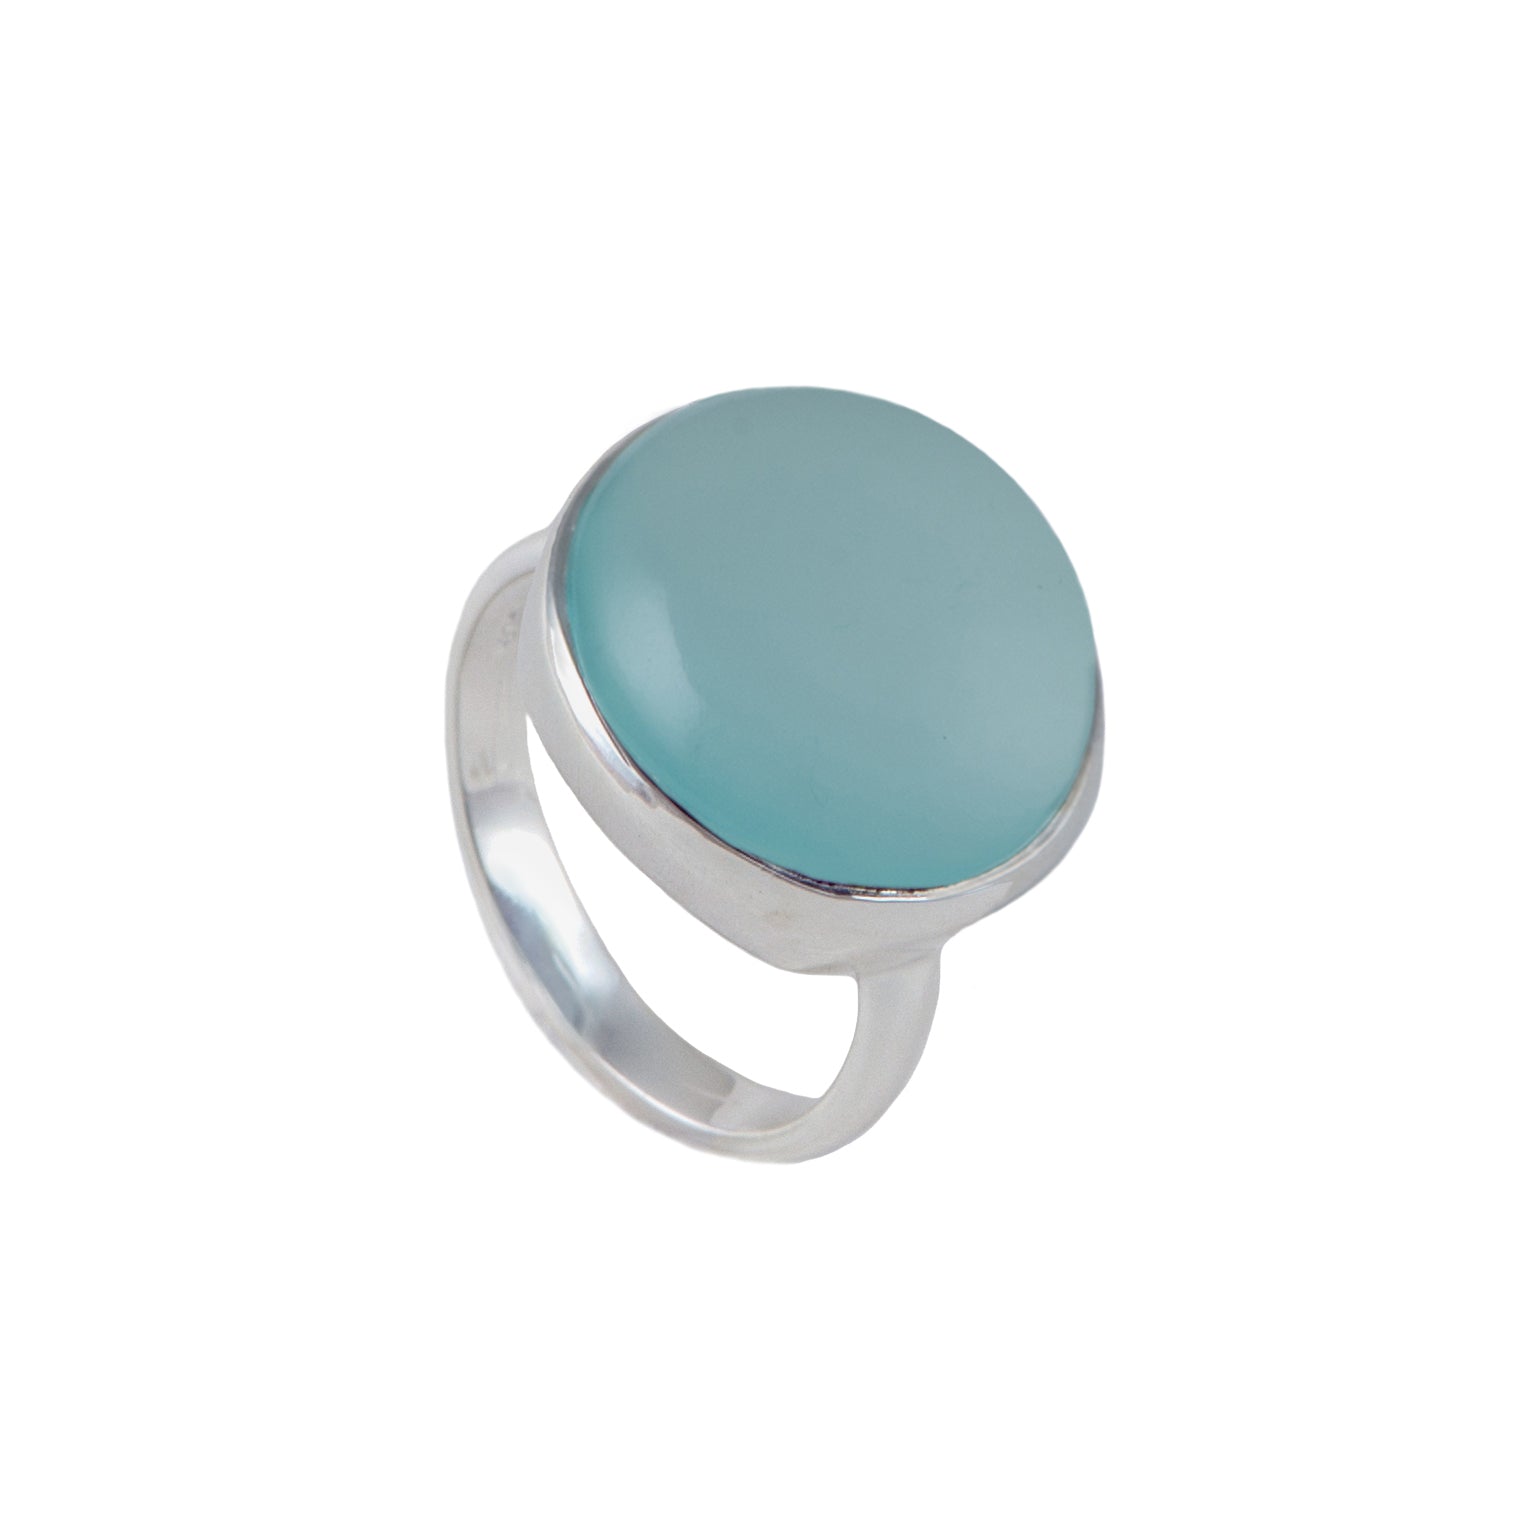 Cabochon Round Cut Natural Gemstone Sterling Silver Ring - Aqua Chalcedony